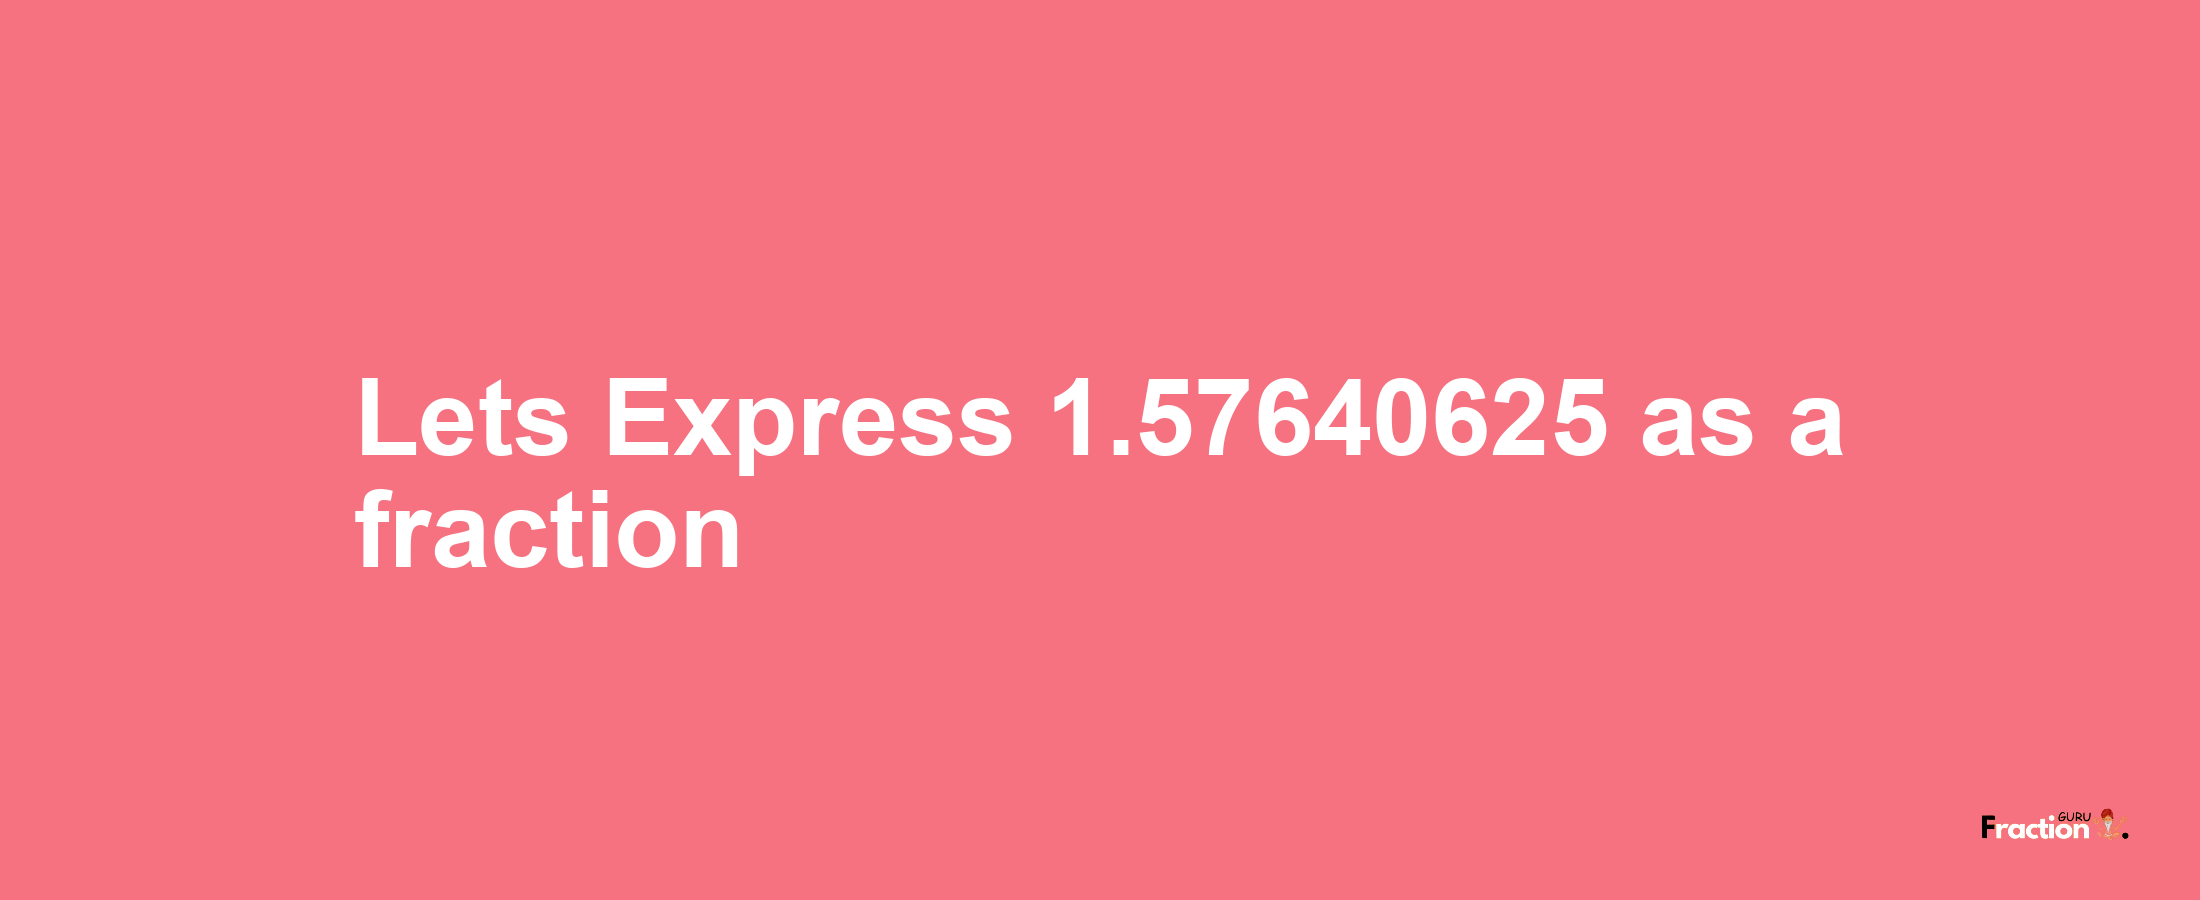 Lets Express 1.57640625 as afraction